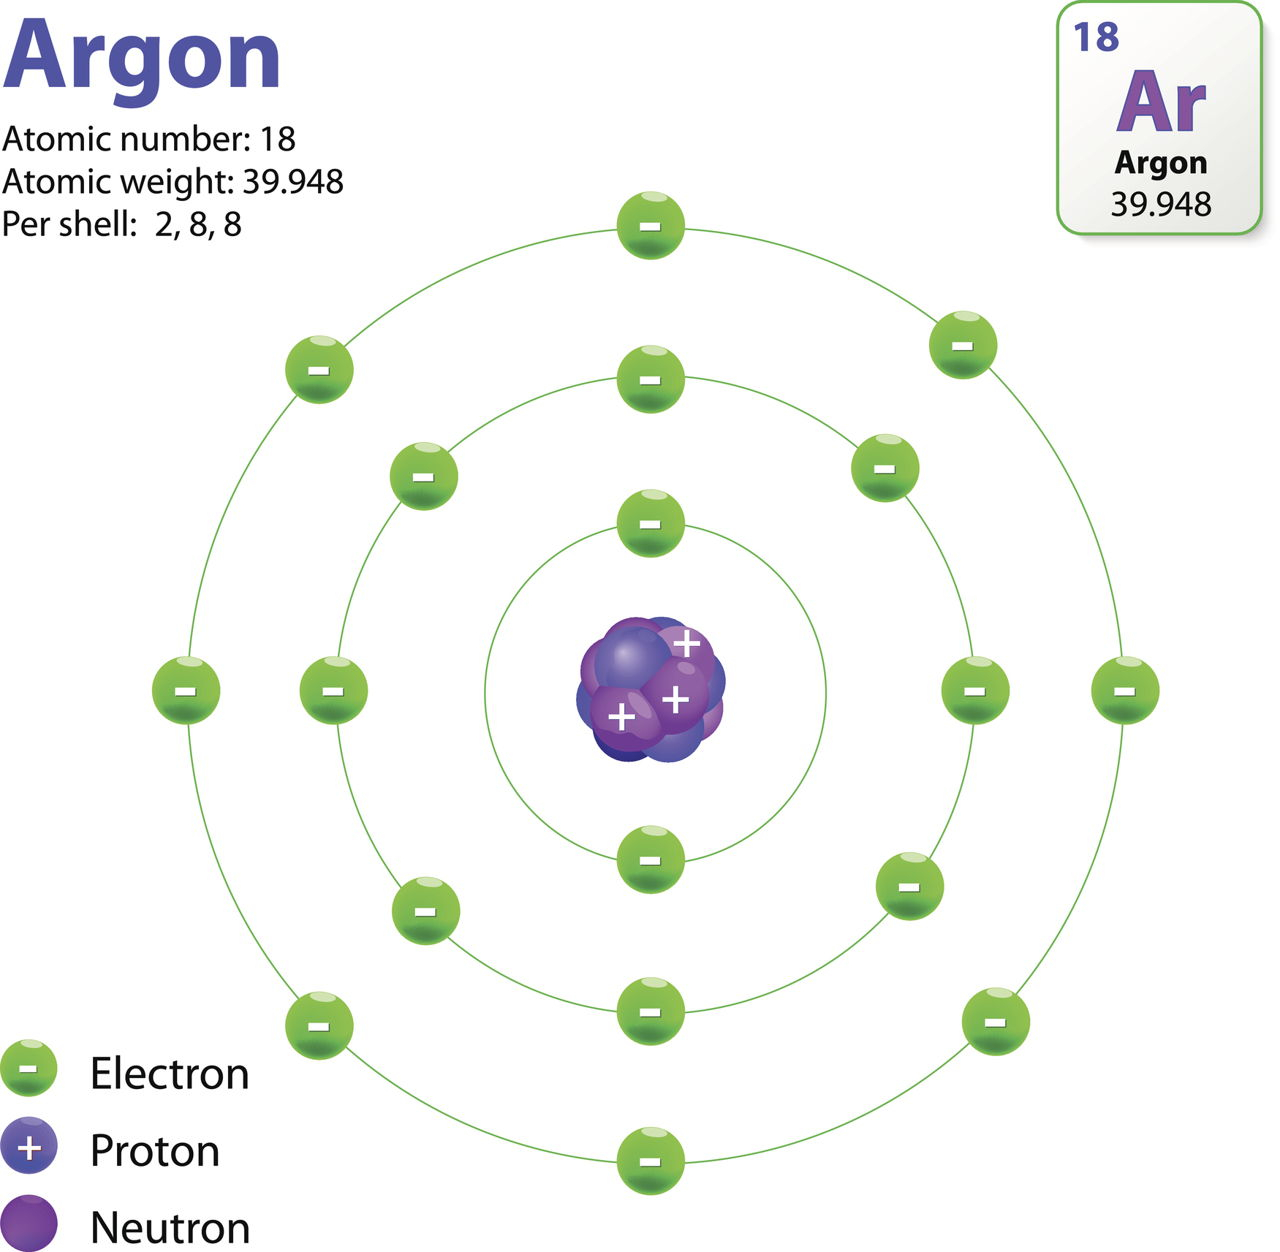 Diagram Of An Atom The Structure Of An Atom Explained With A Labeled Diagram